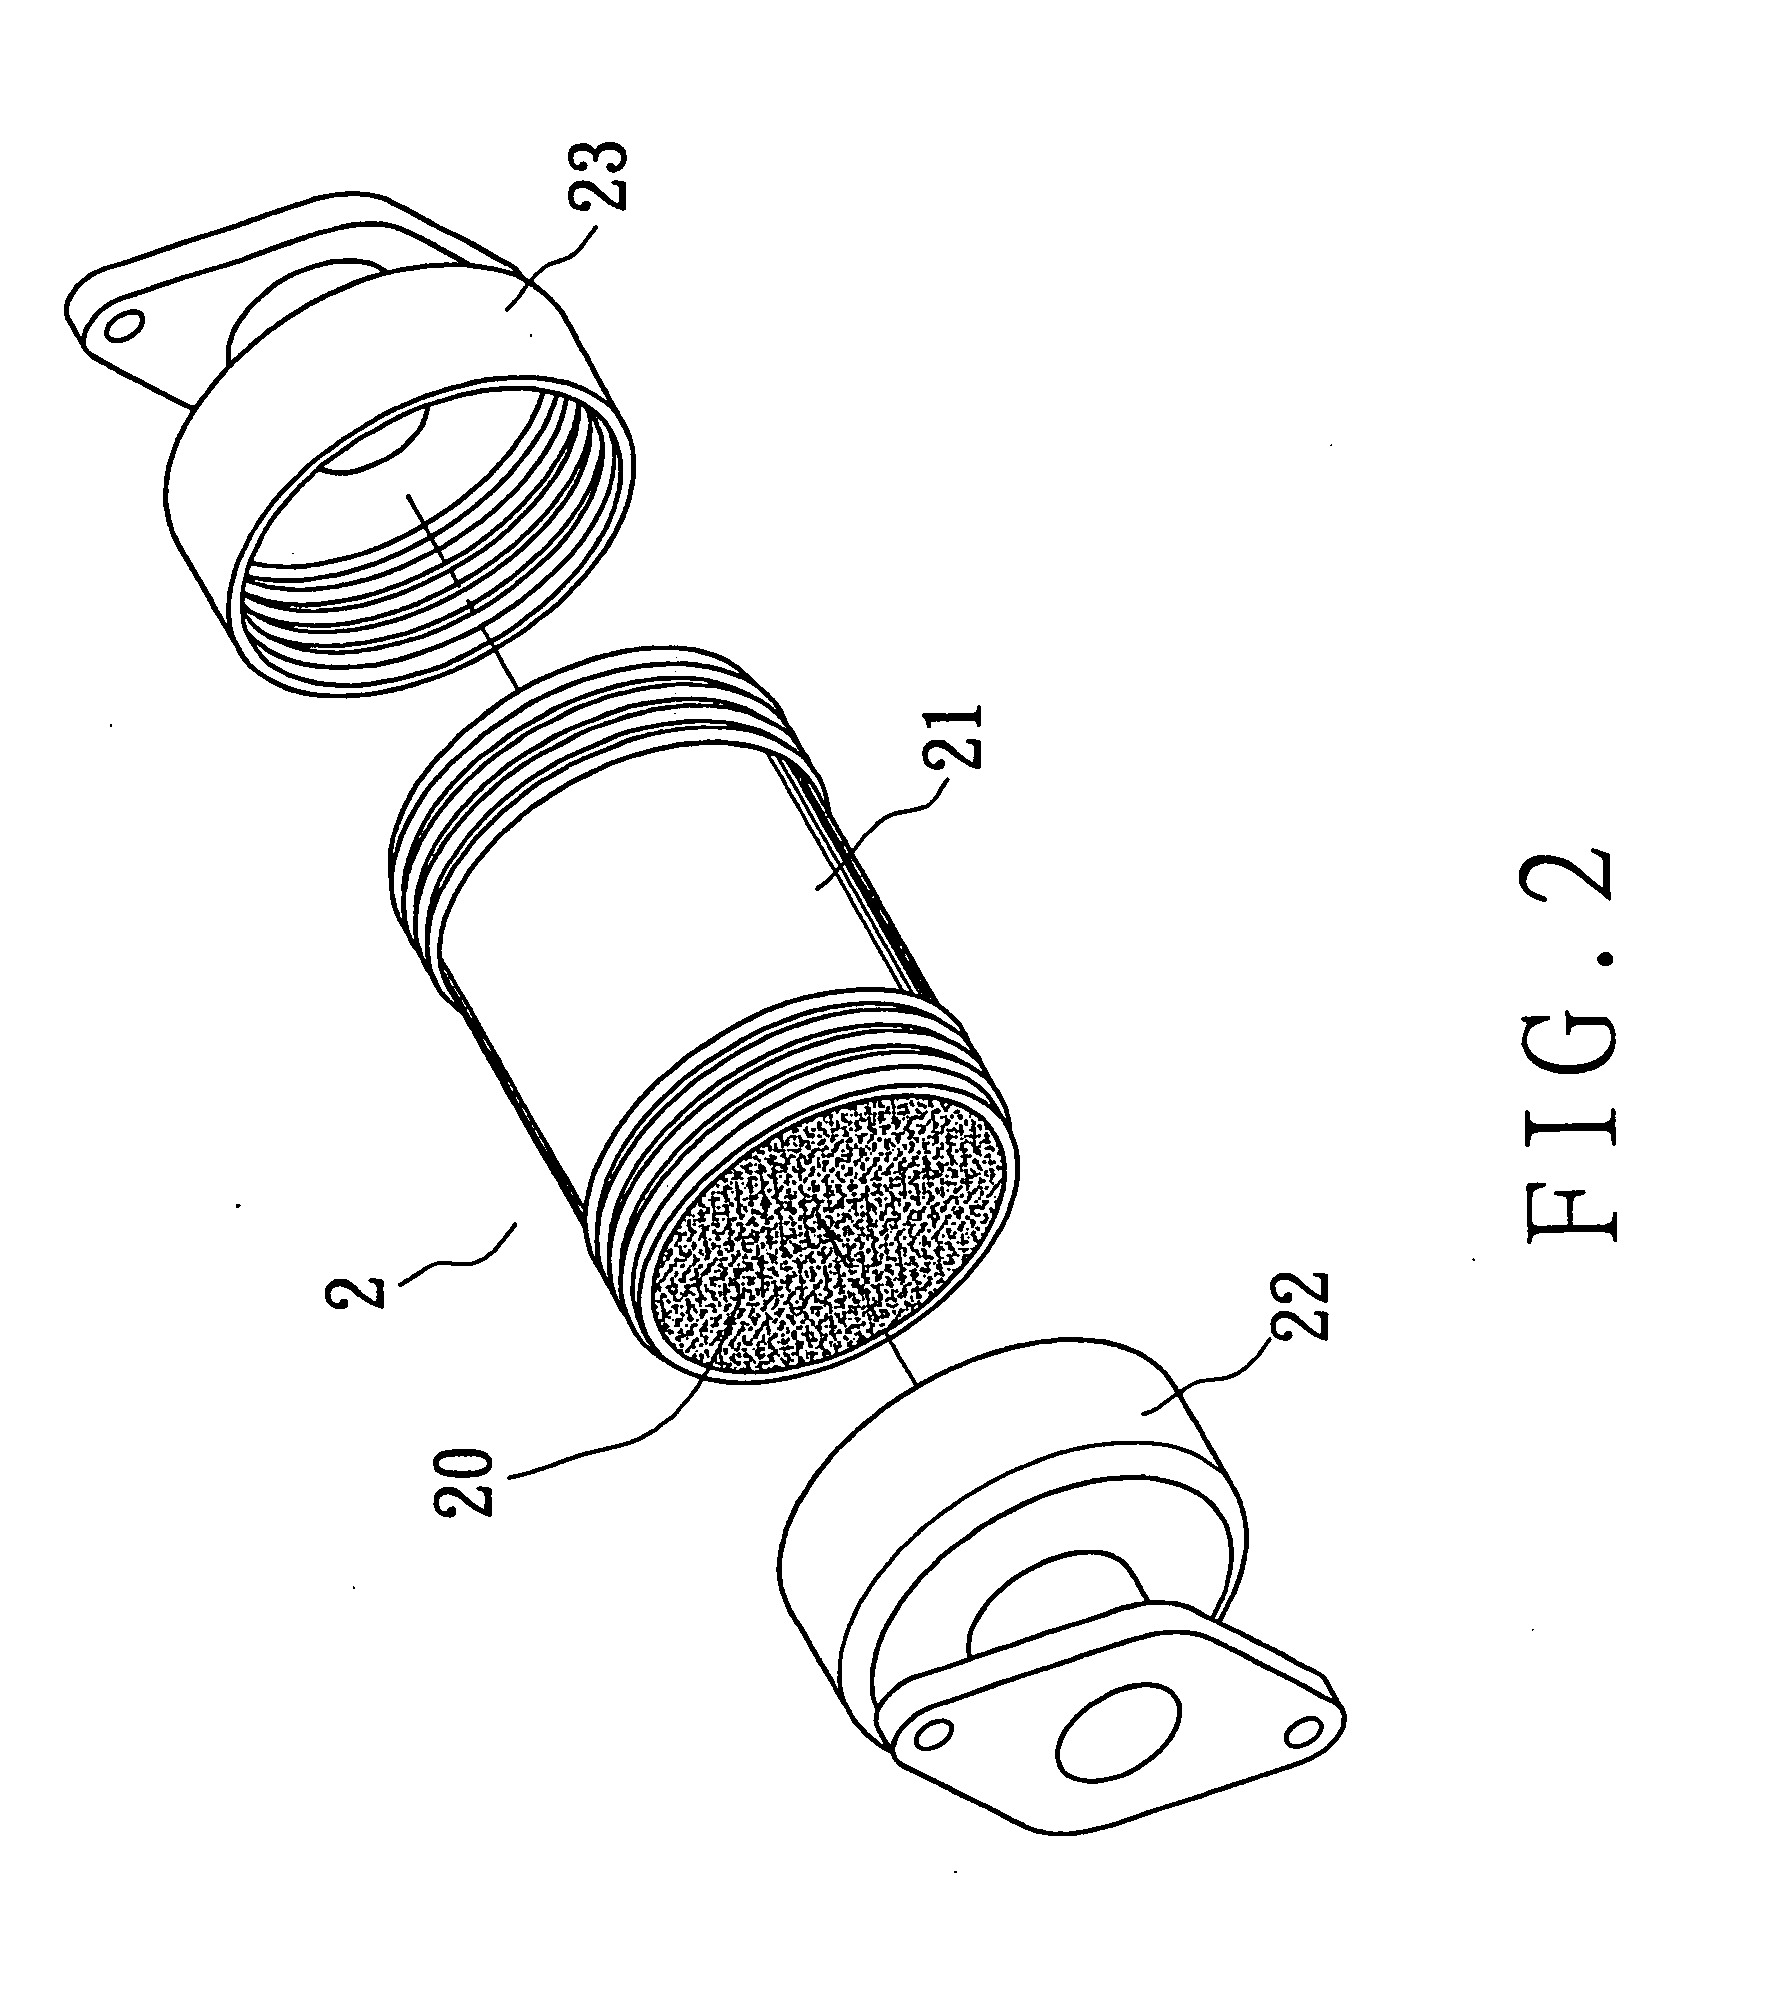 Filtration device of water pump